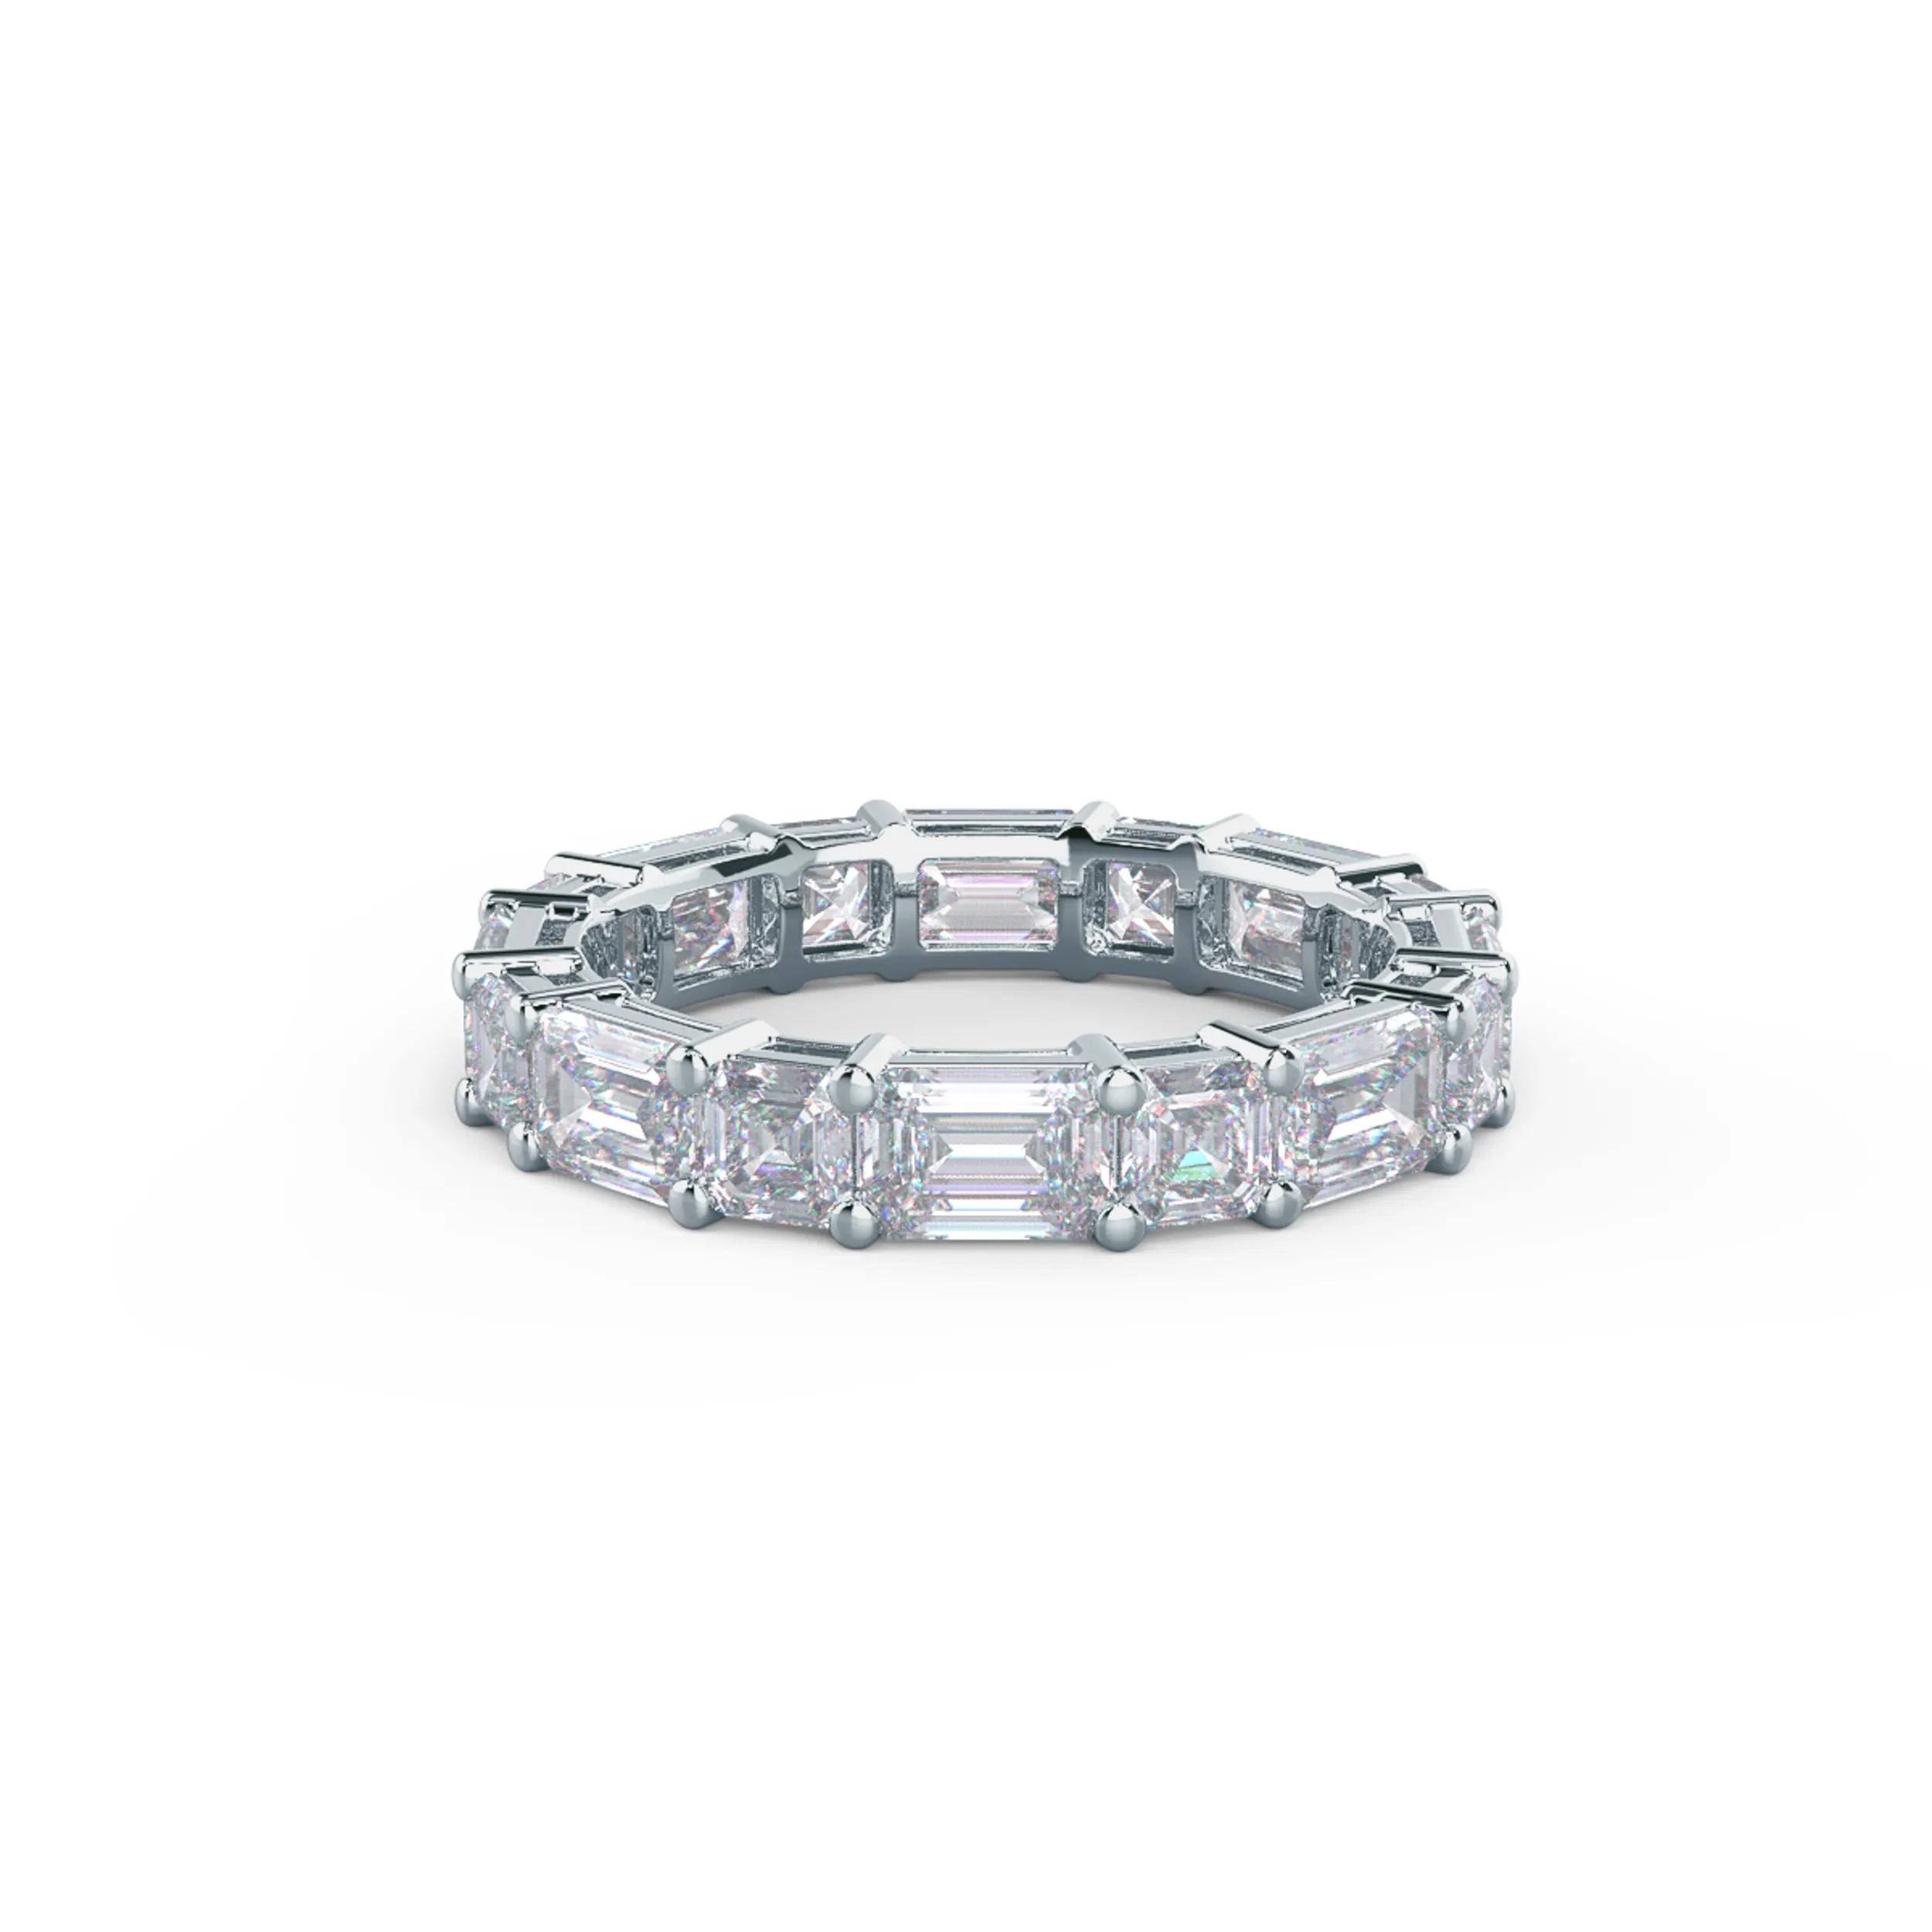 18k White Gold Emerald and Asscher East-West Eternity Band featuring High Quality 4.8 Carat Diamonds (Main View)